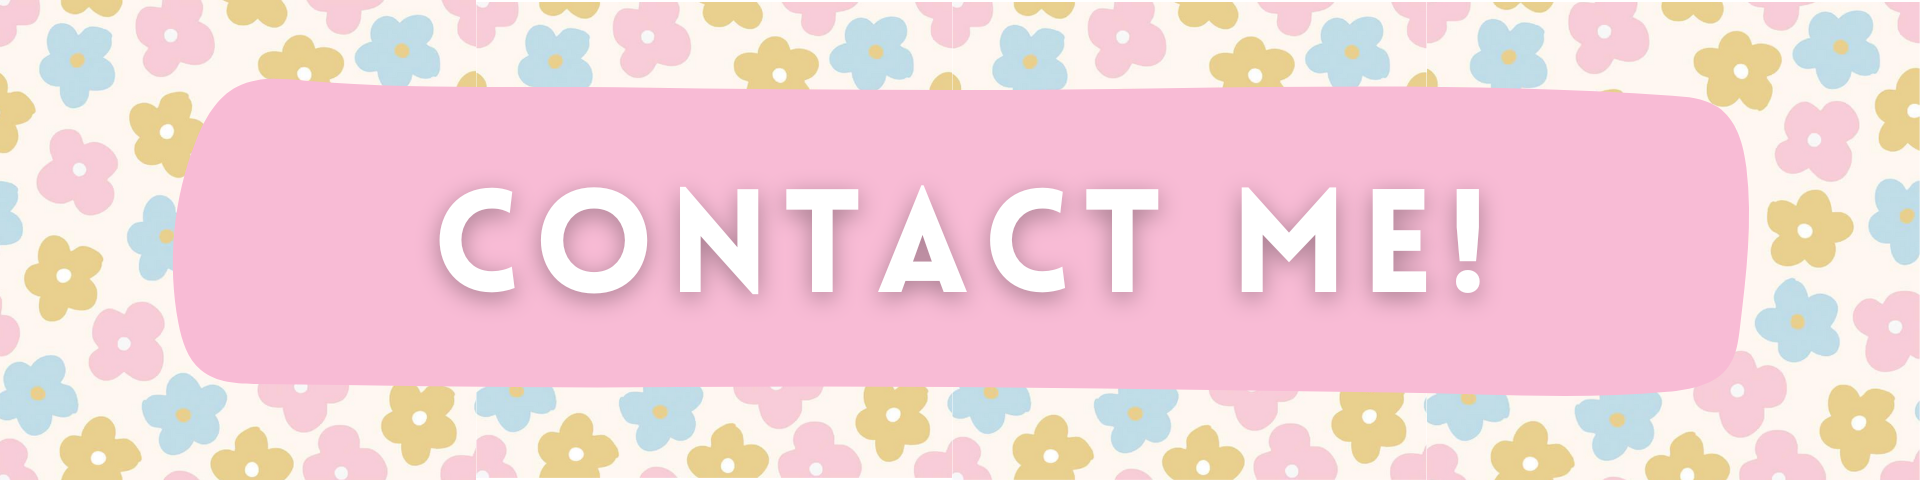 Contact me banner